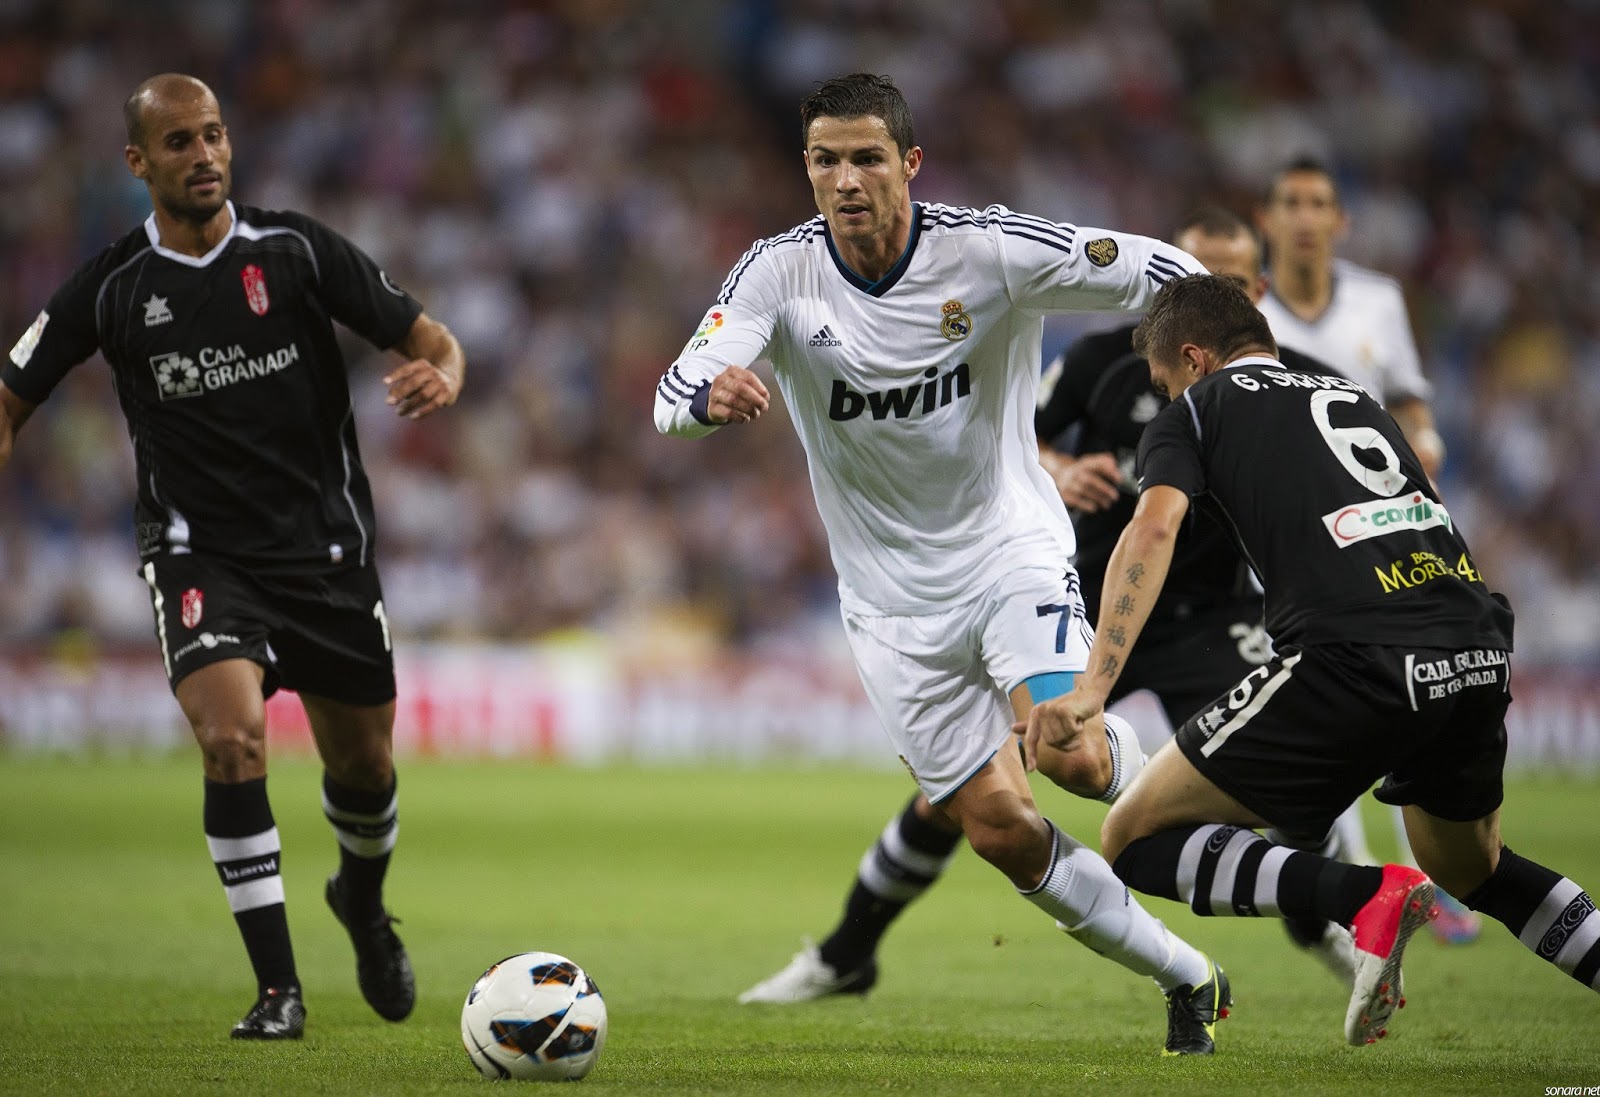 Top 7 Latest Football Games Players HD Wallpapers Best Collection